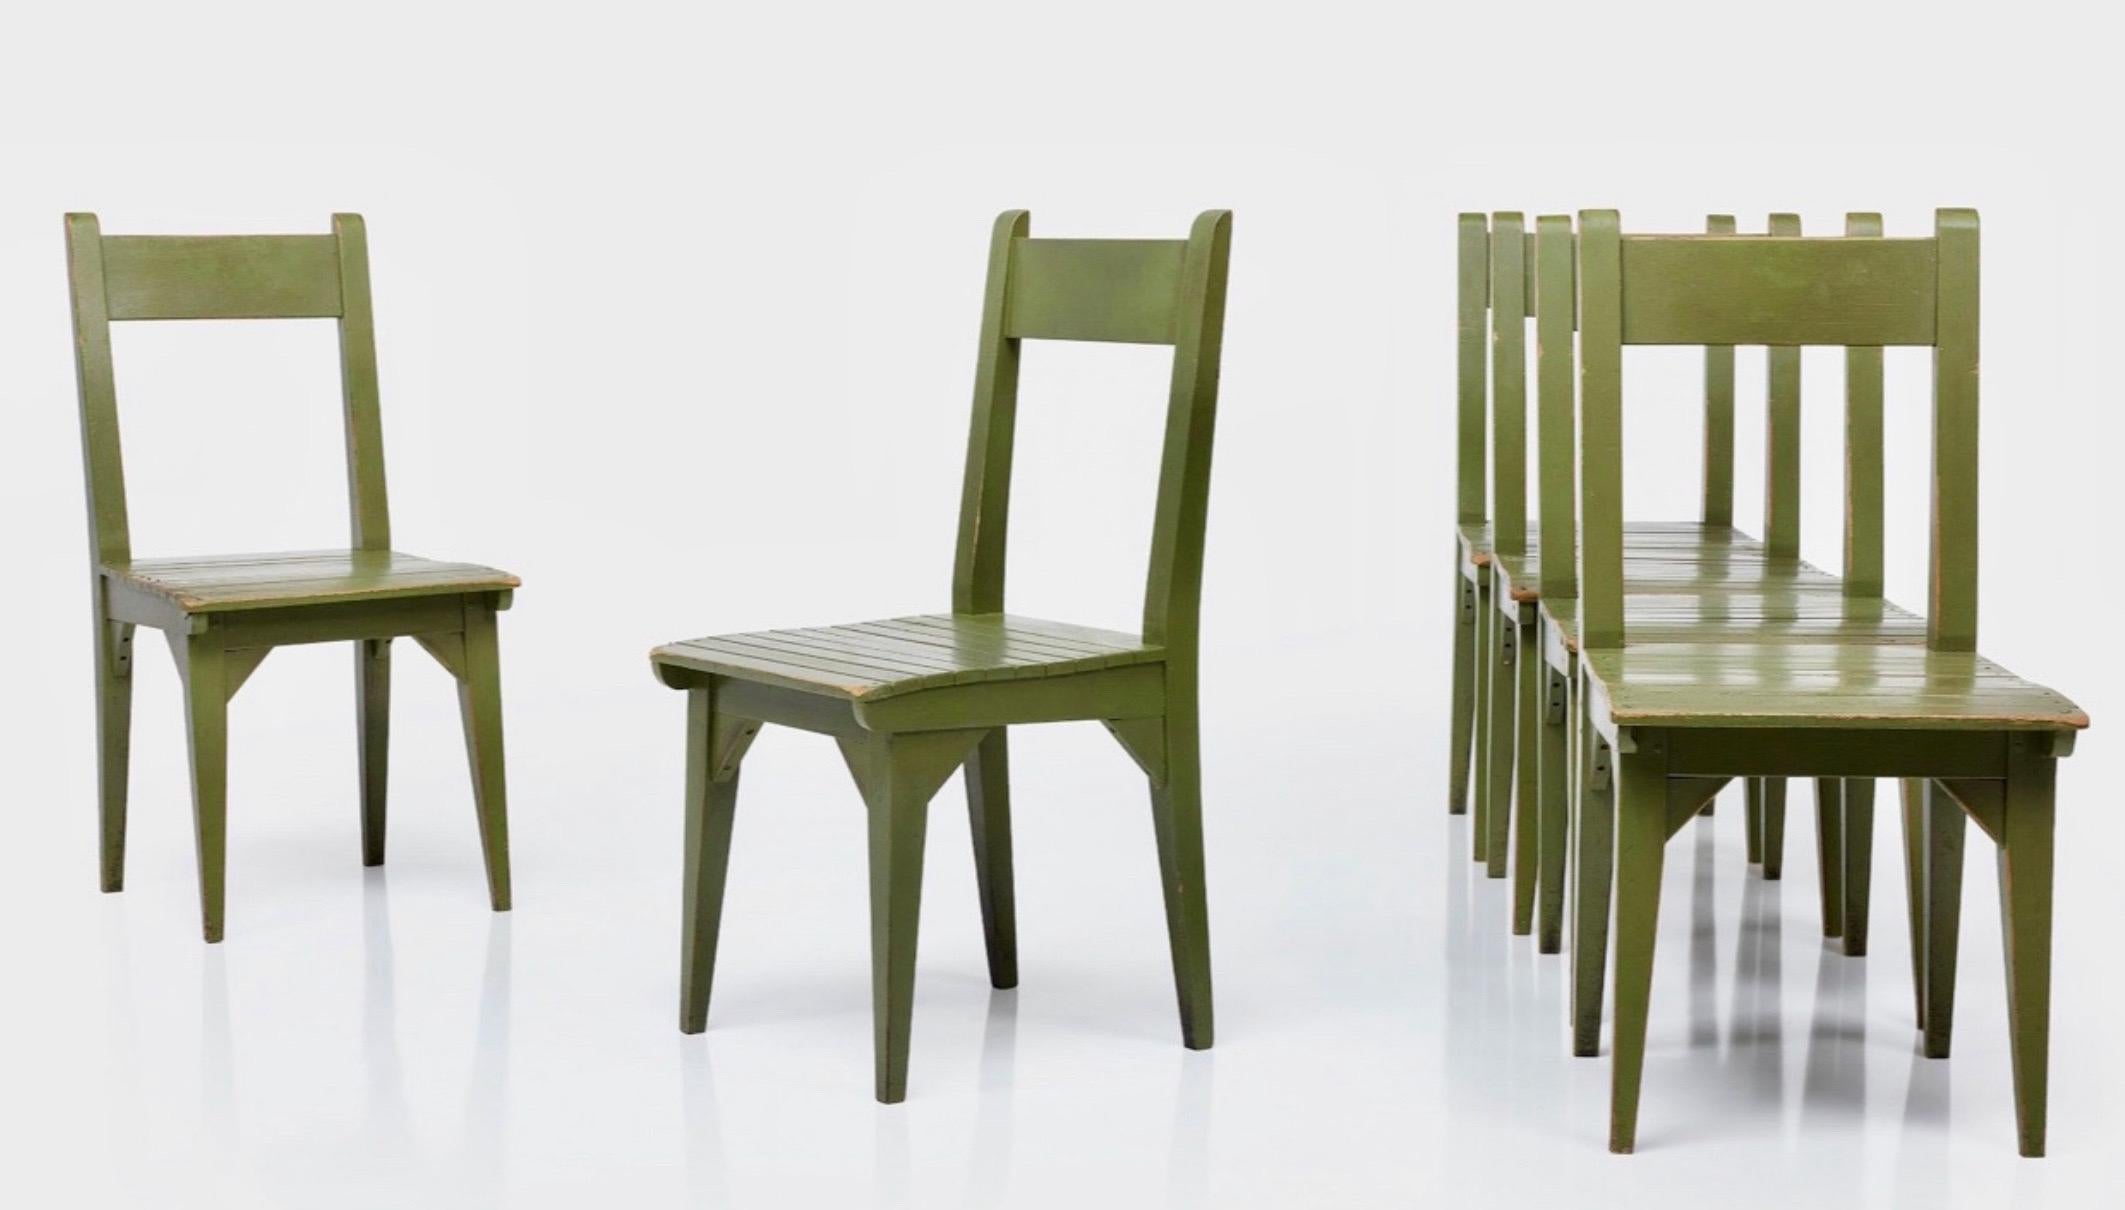 Hand-Painted Roy McMakin Painted Wood Postmodern Dining Chair Set of 6, Green, 1982, USA. For Sale